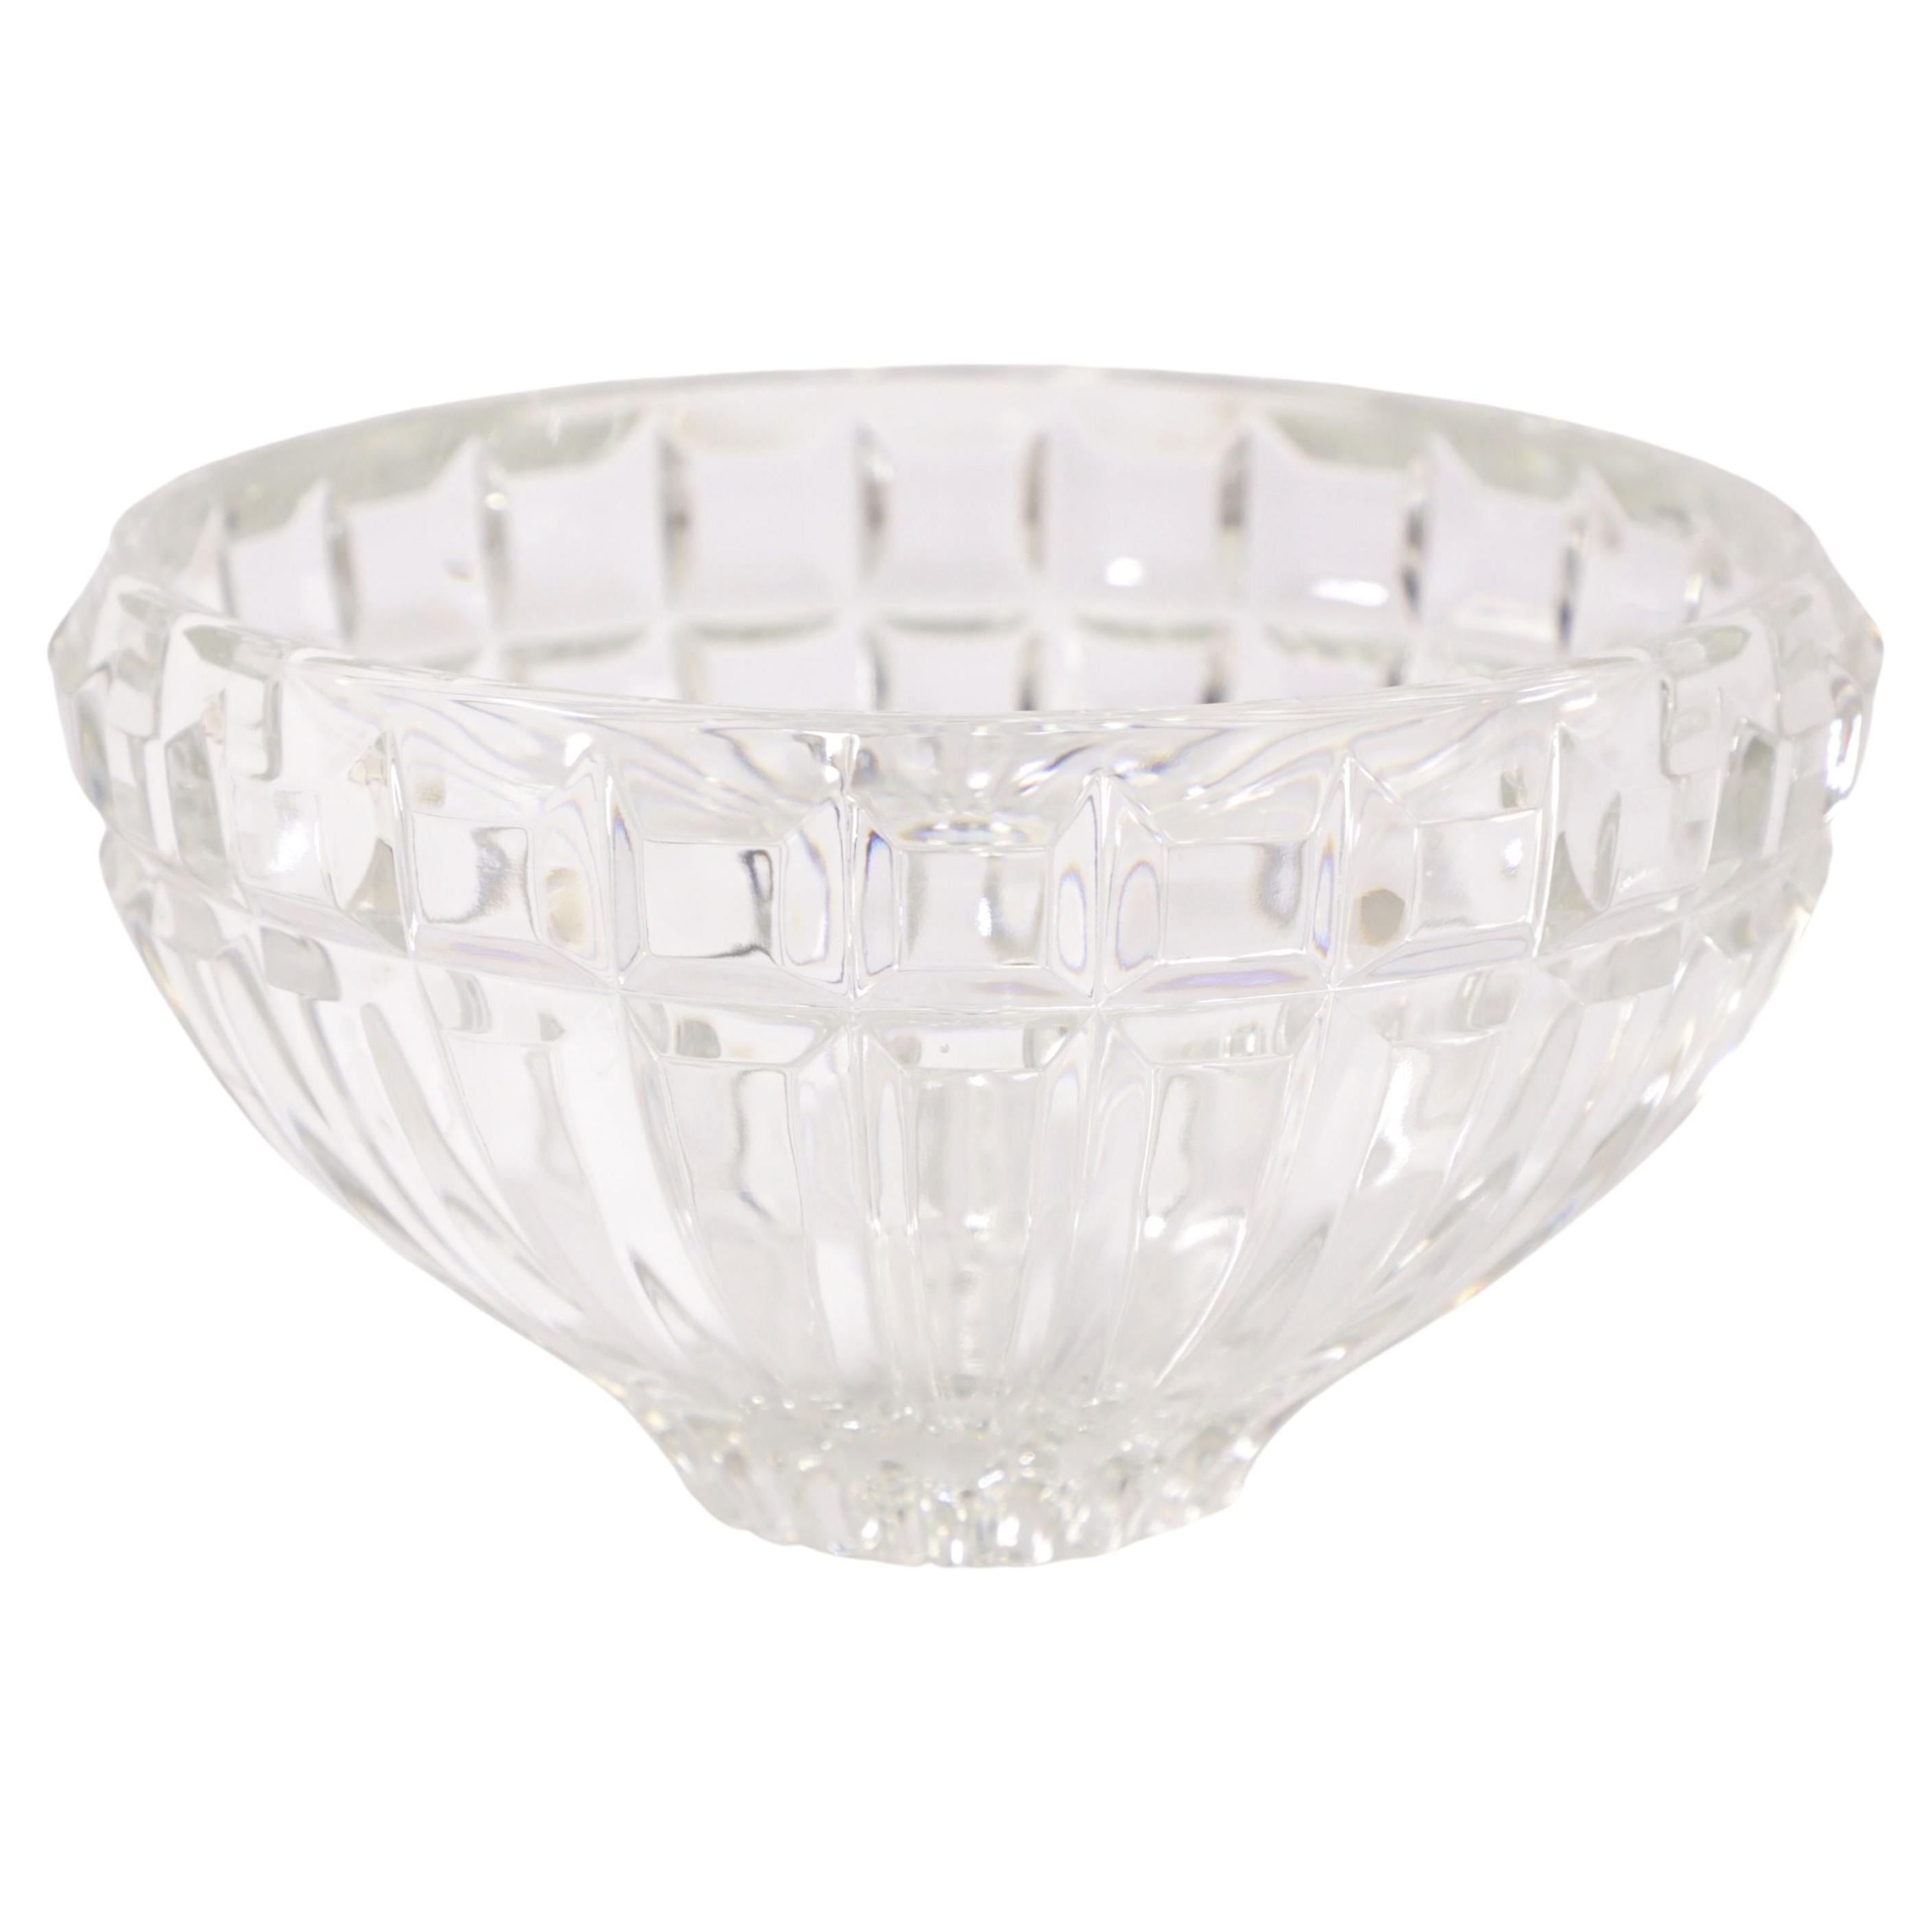 Late 20th Century Crystal Bowl - C